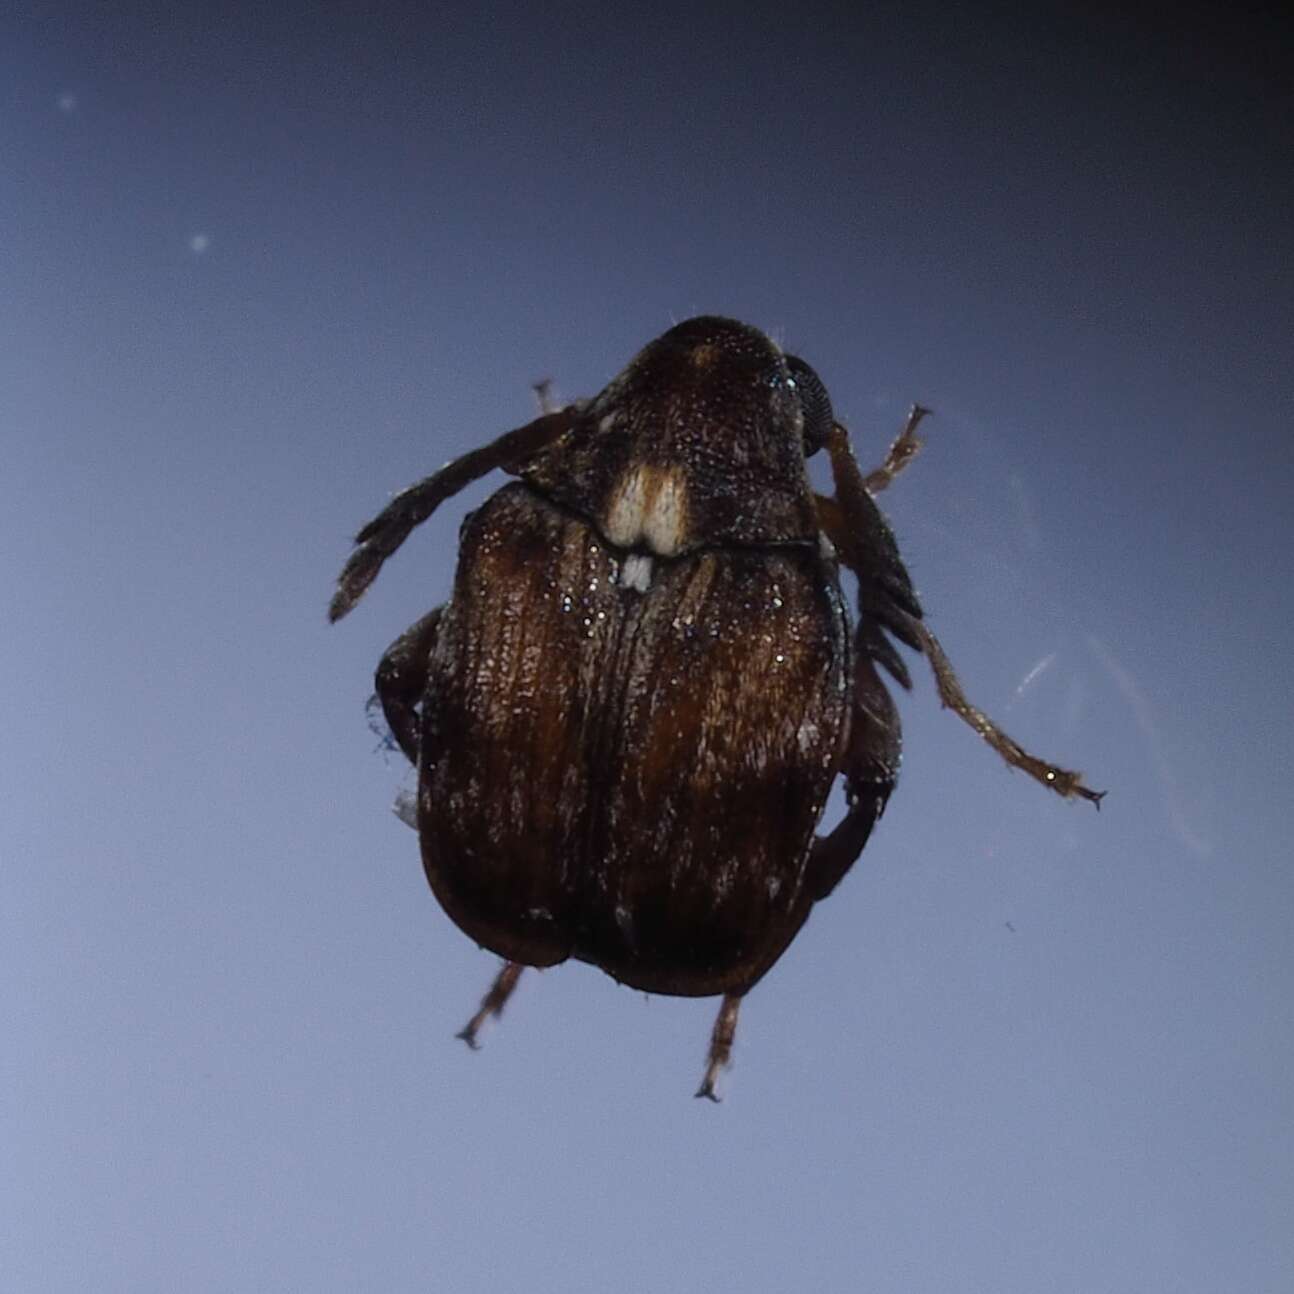 Image of Southern Cowpea Weevil